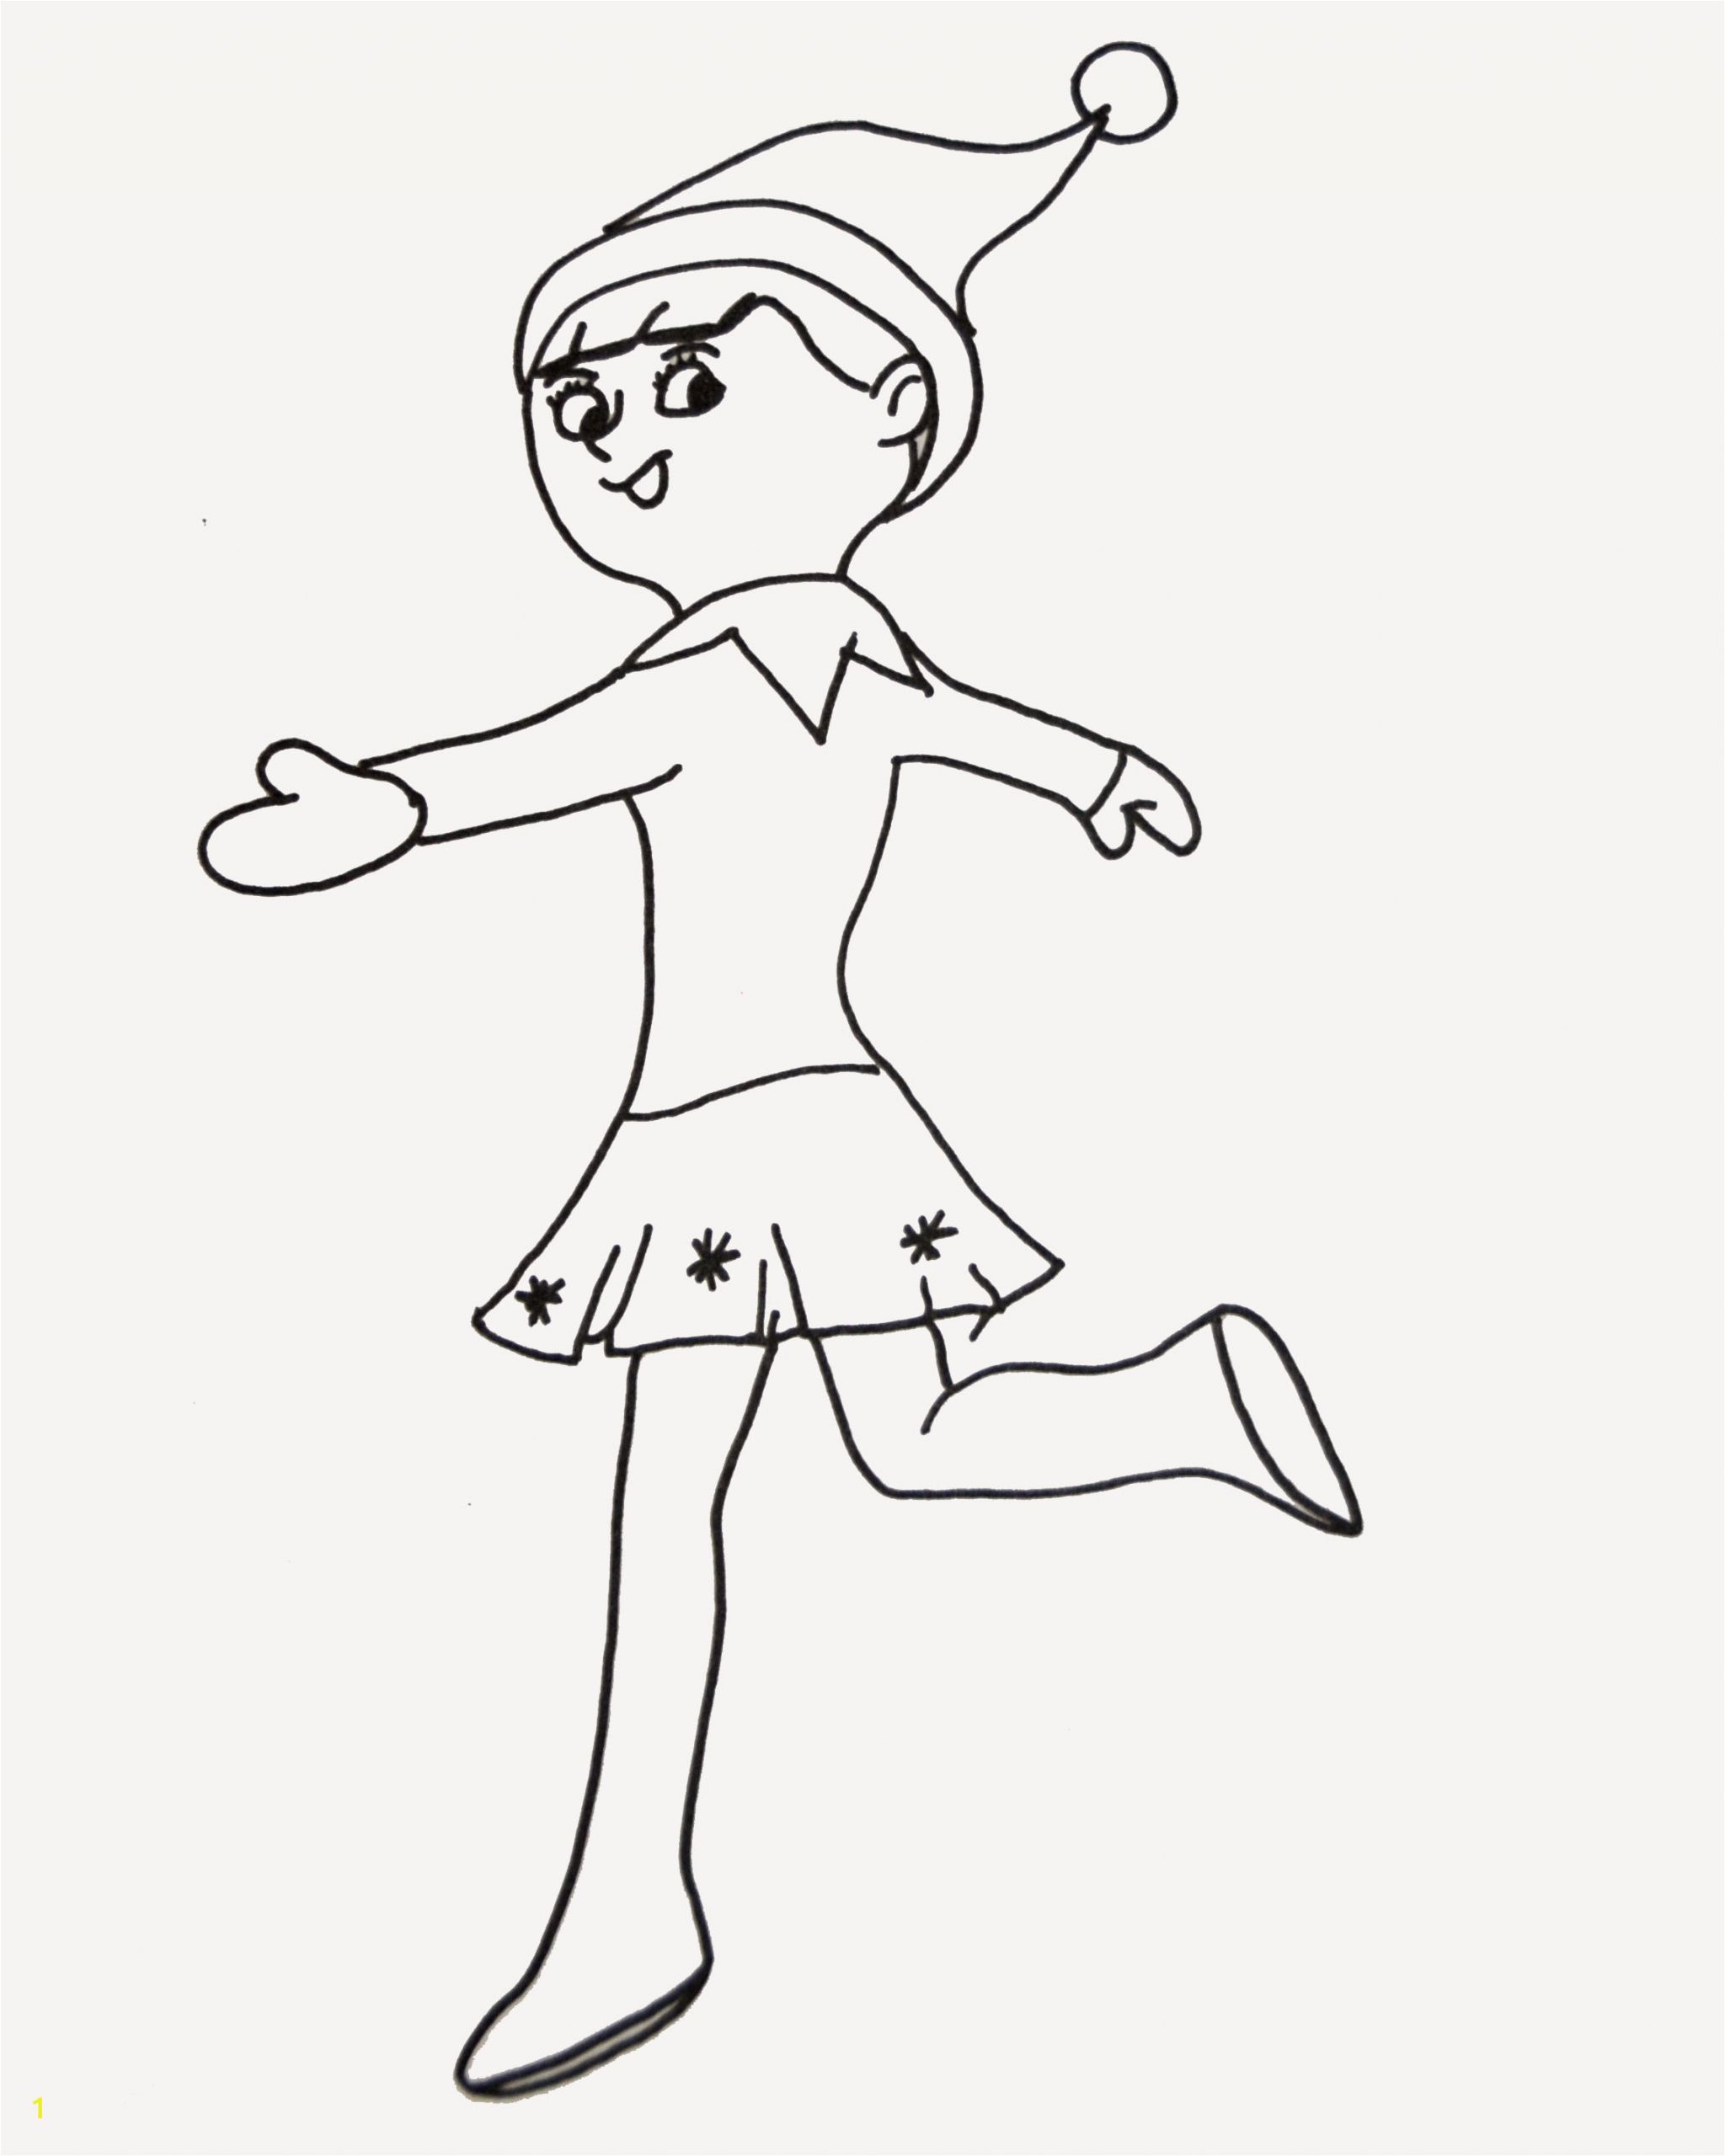 Elf On the Shelf Coloring Pages Girl Girl Elf the Shelf Coloring Pages Christmas Coloring Pages